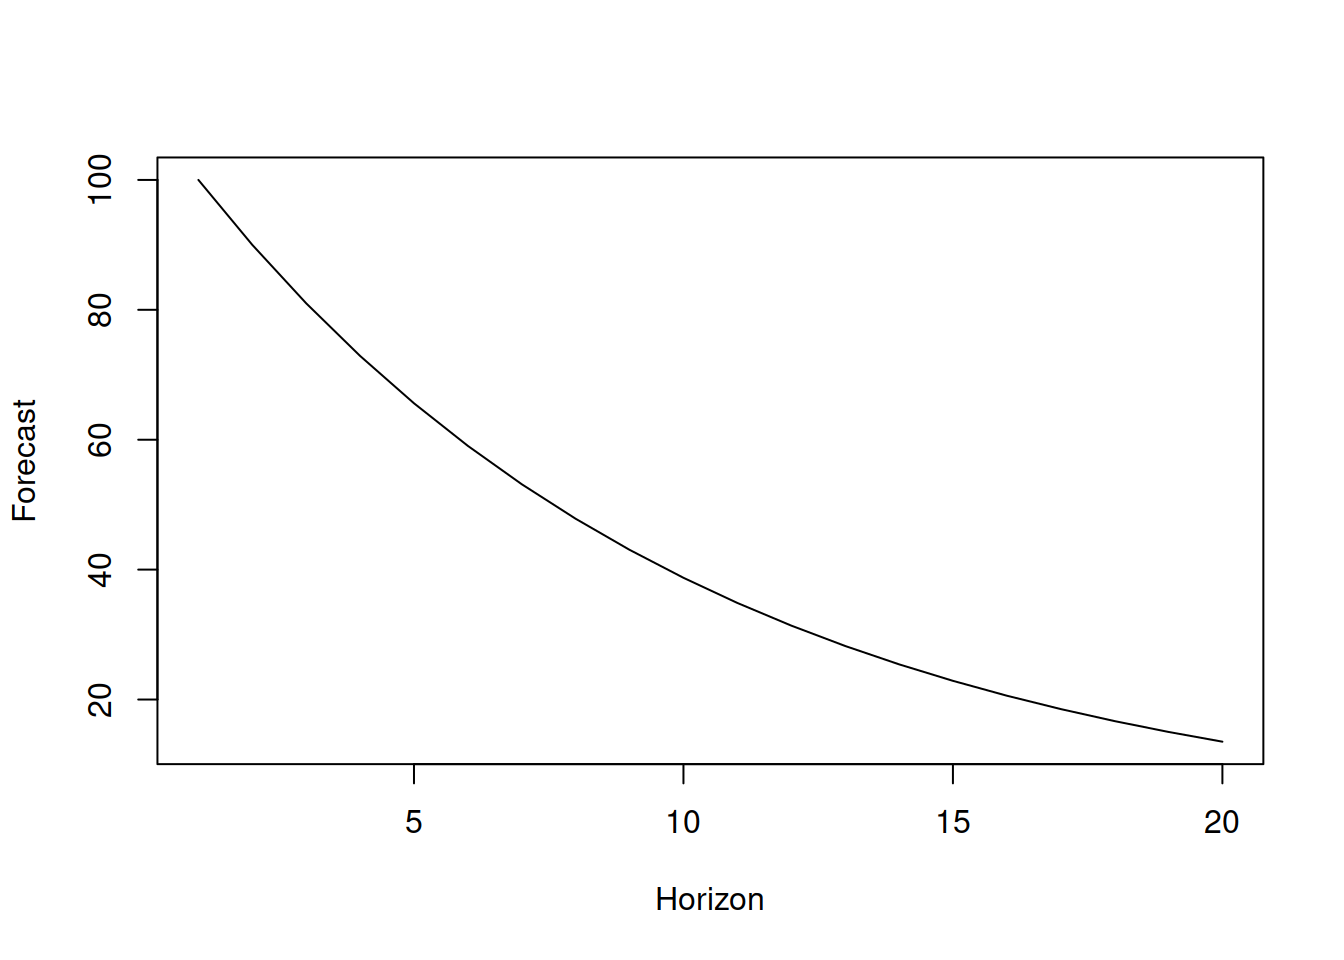 Forecast trajectory for AR(1) with $\phi_1=0.9$.